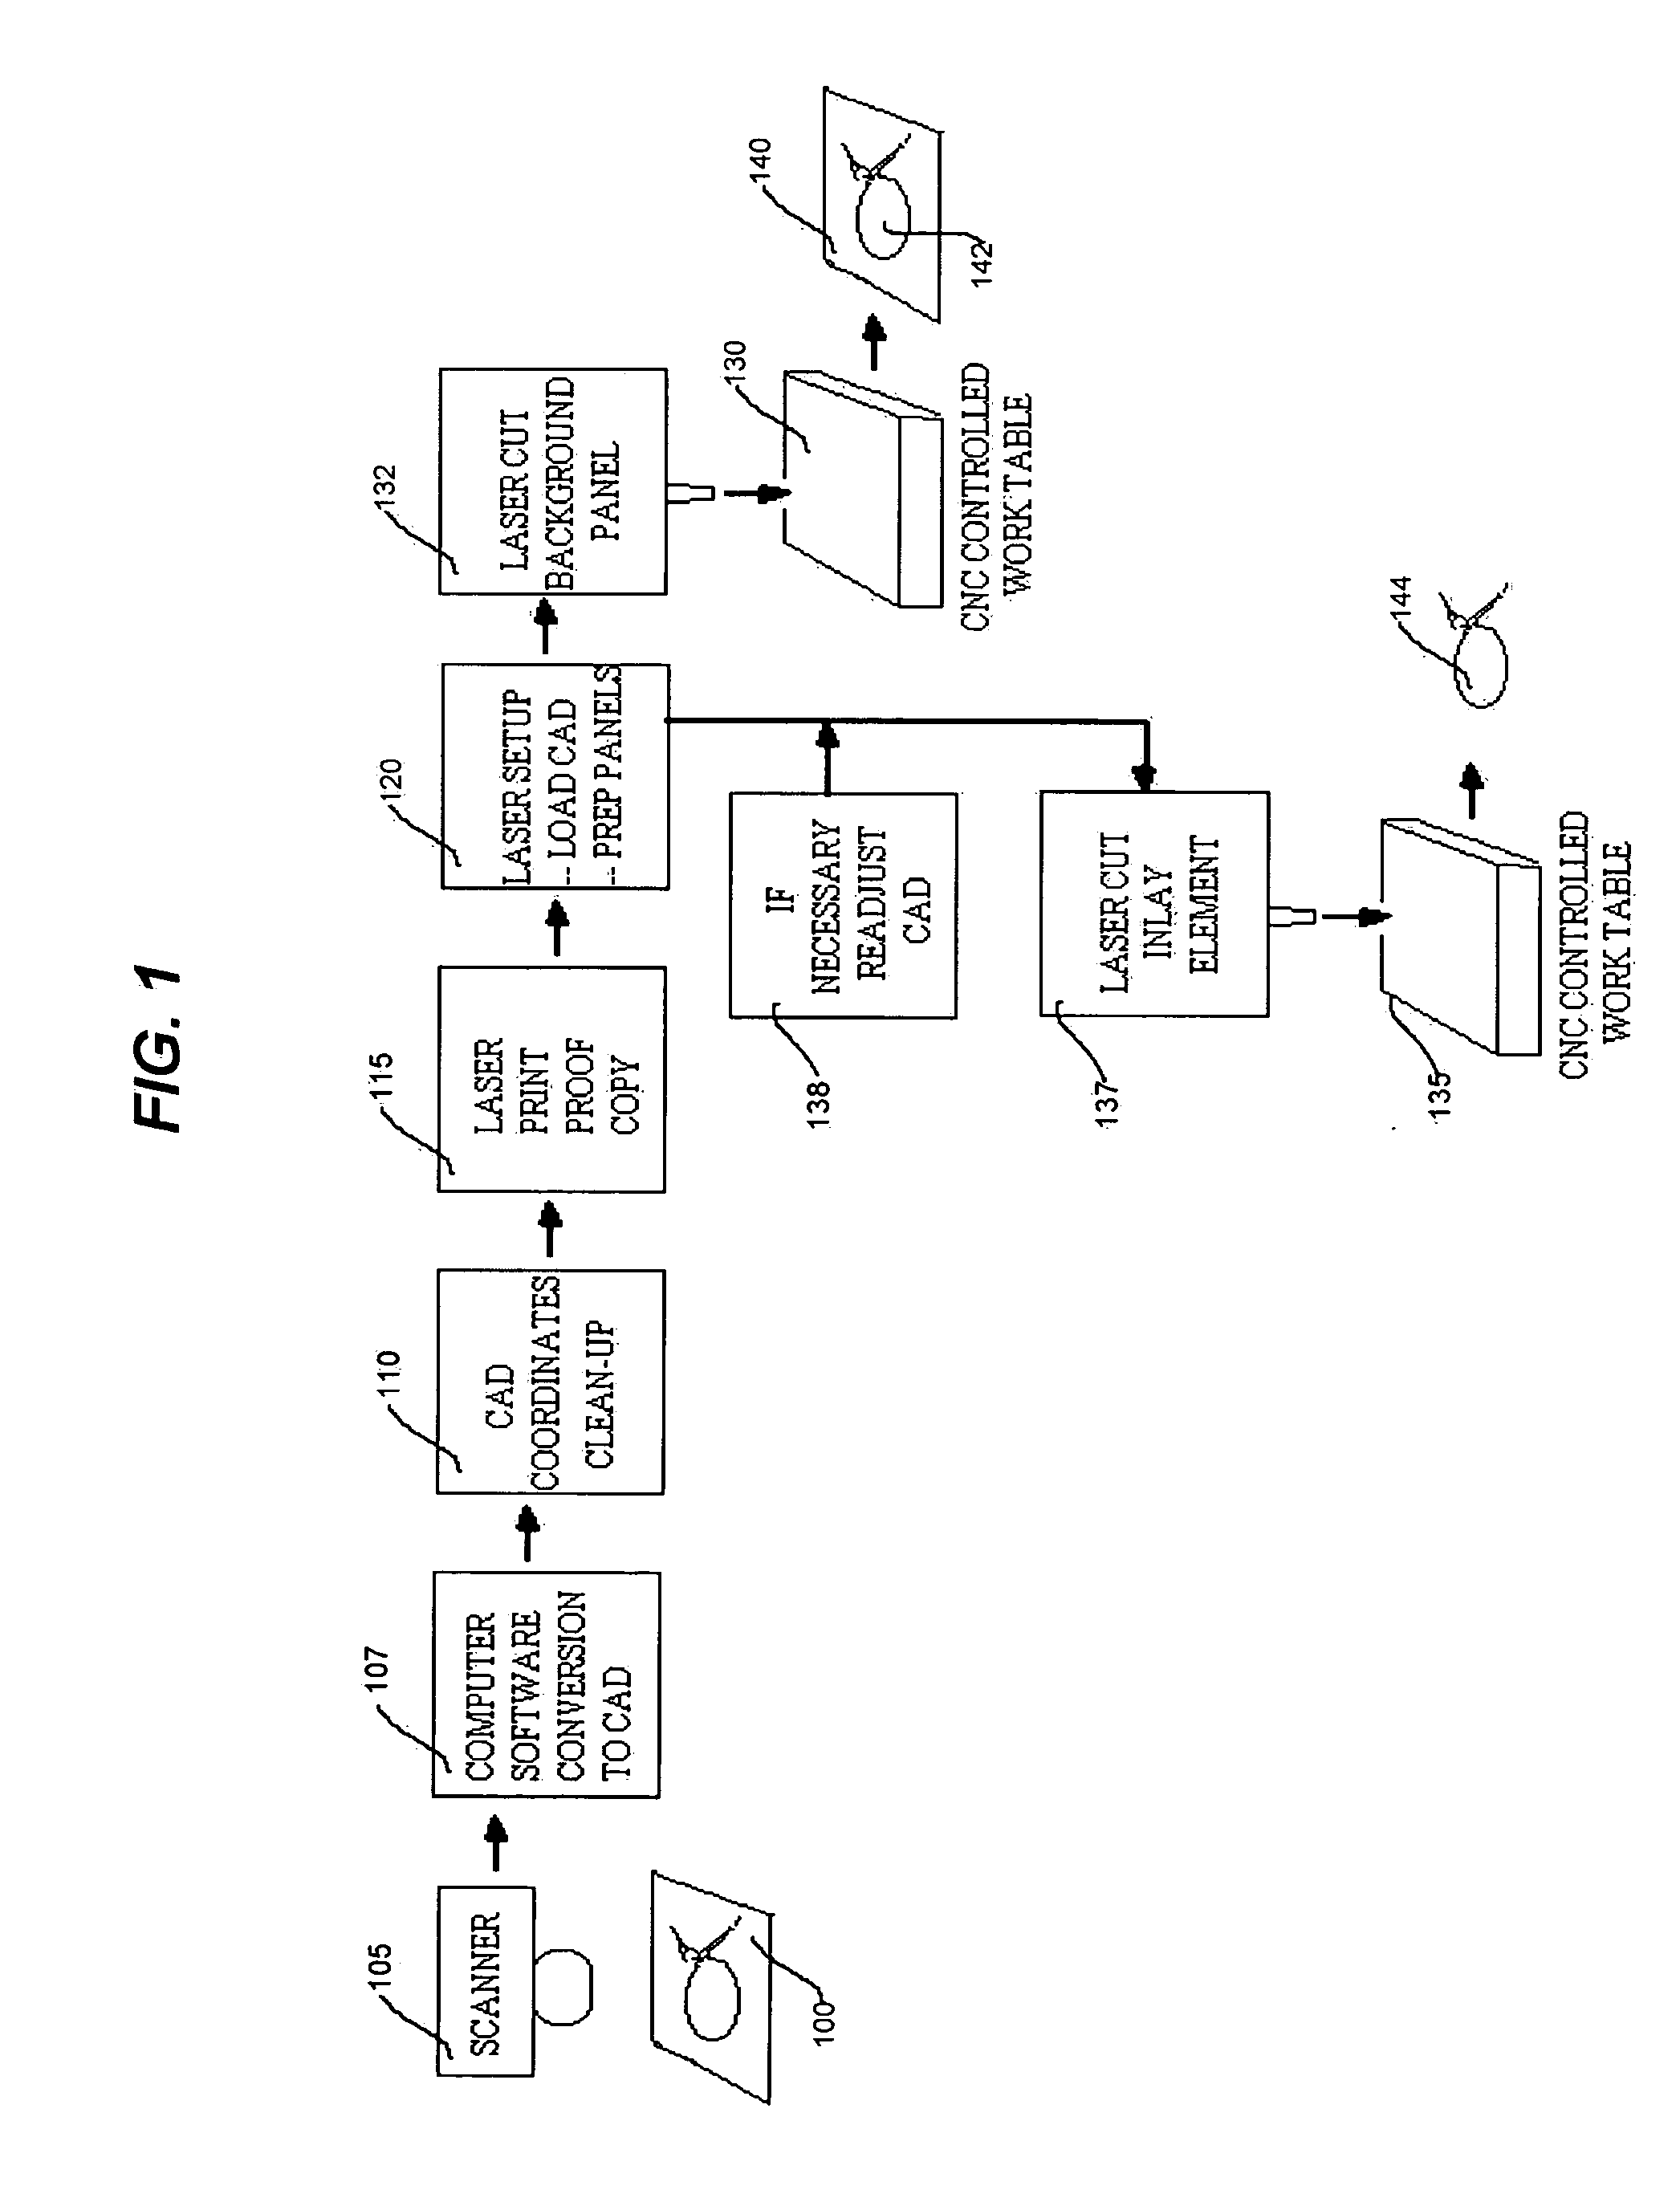 System for manufacturing an inlay panel using a laser